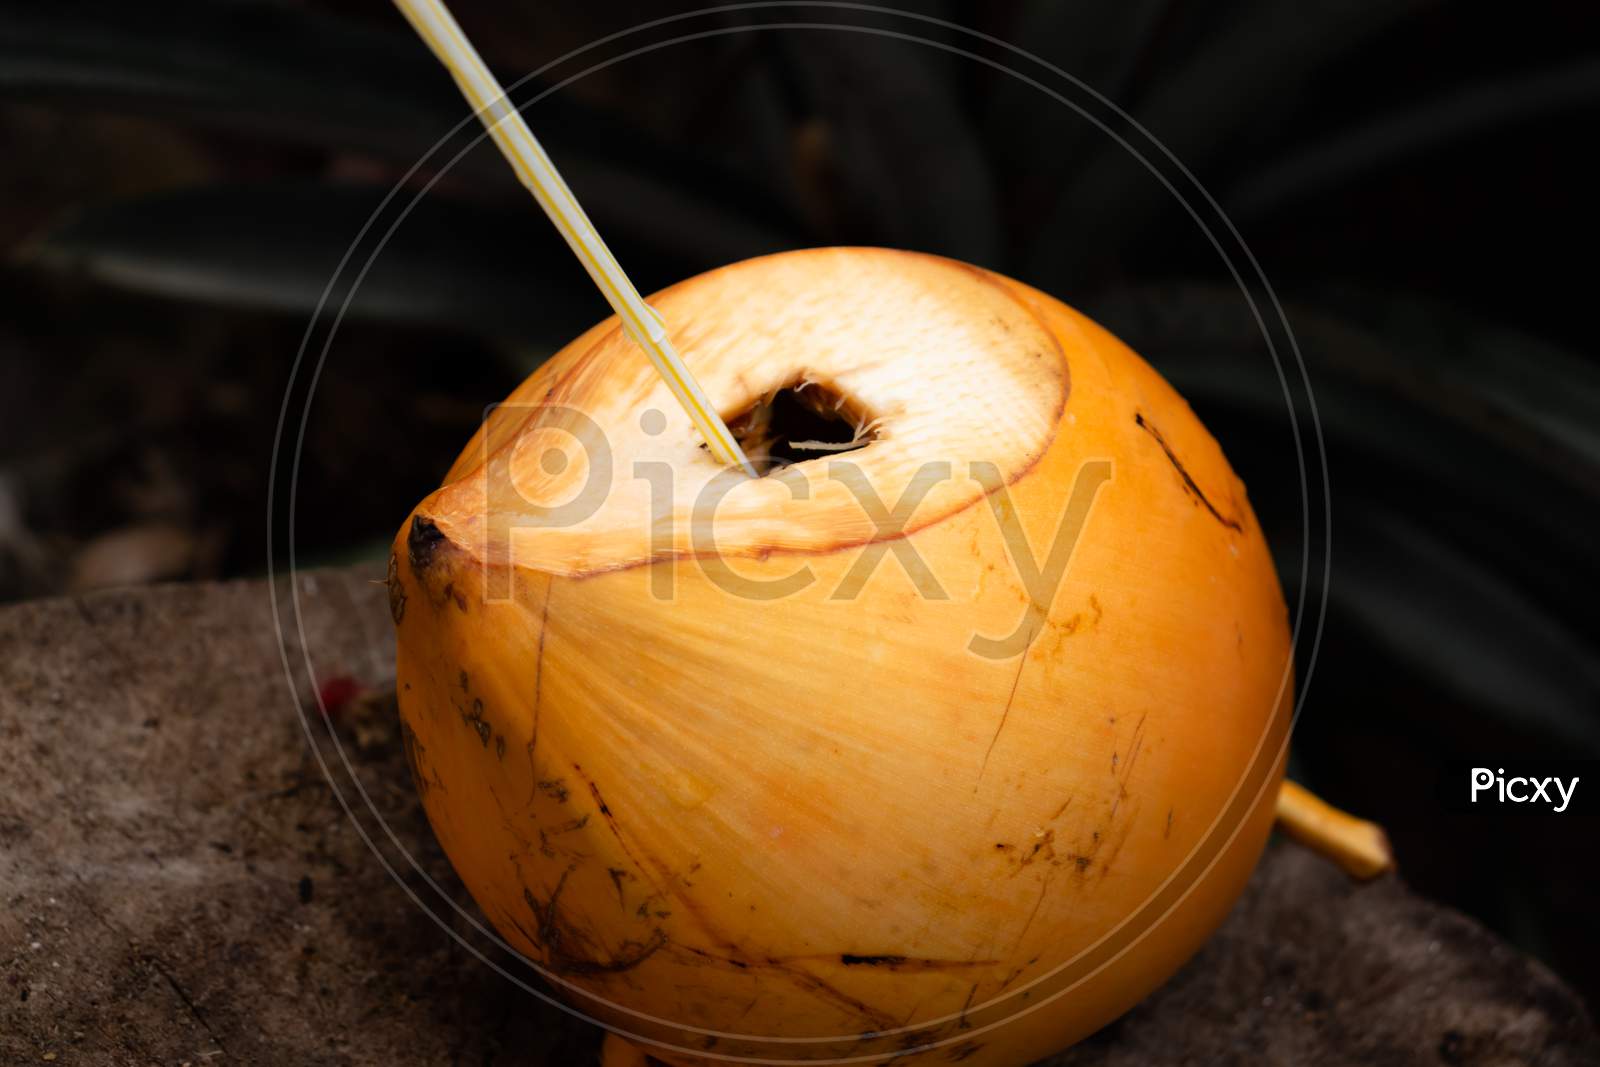 King Coconut With A Straw Inside